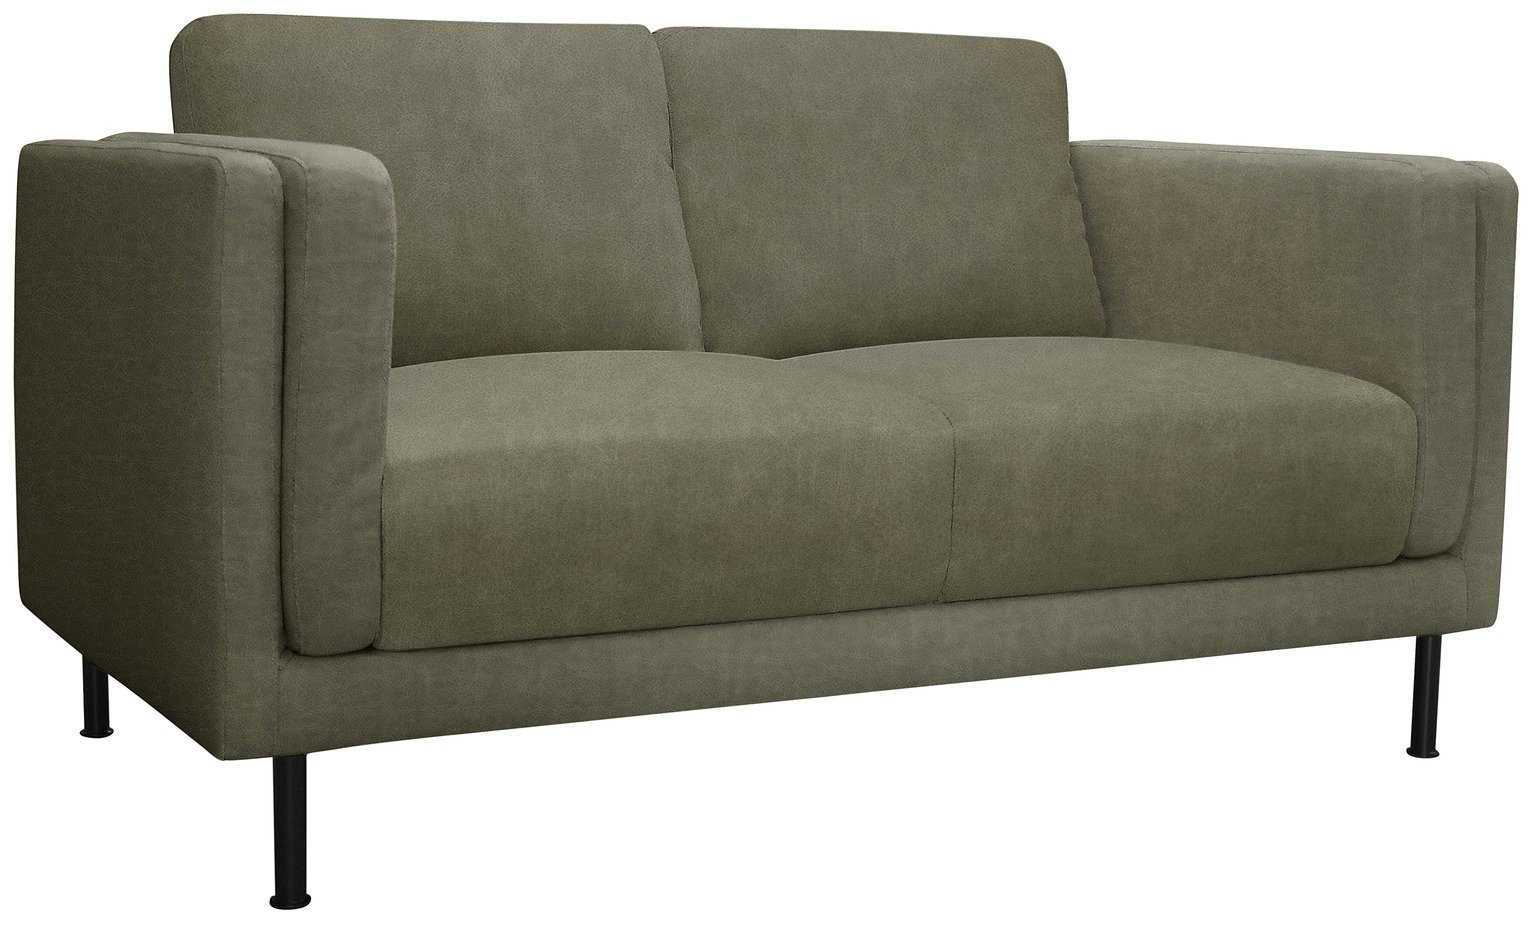 Argos Home Hugo 2 Seater Faux Leather Sofa Review